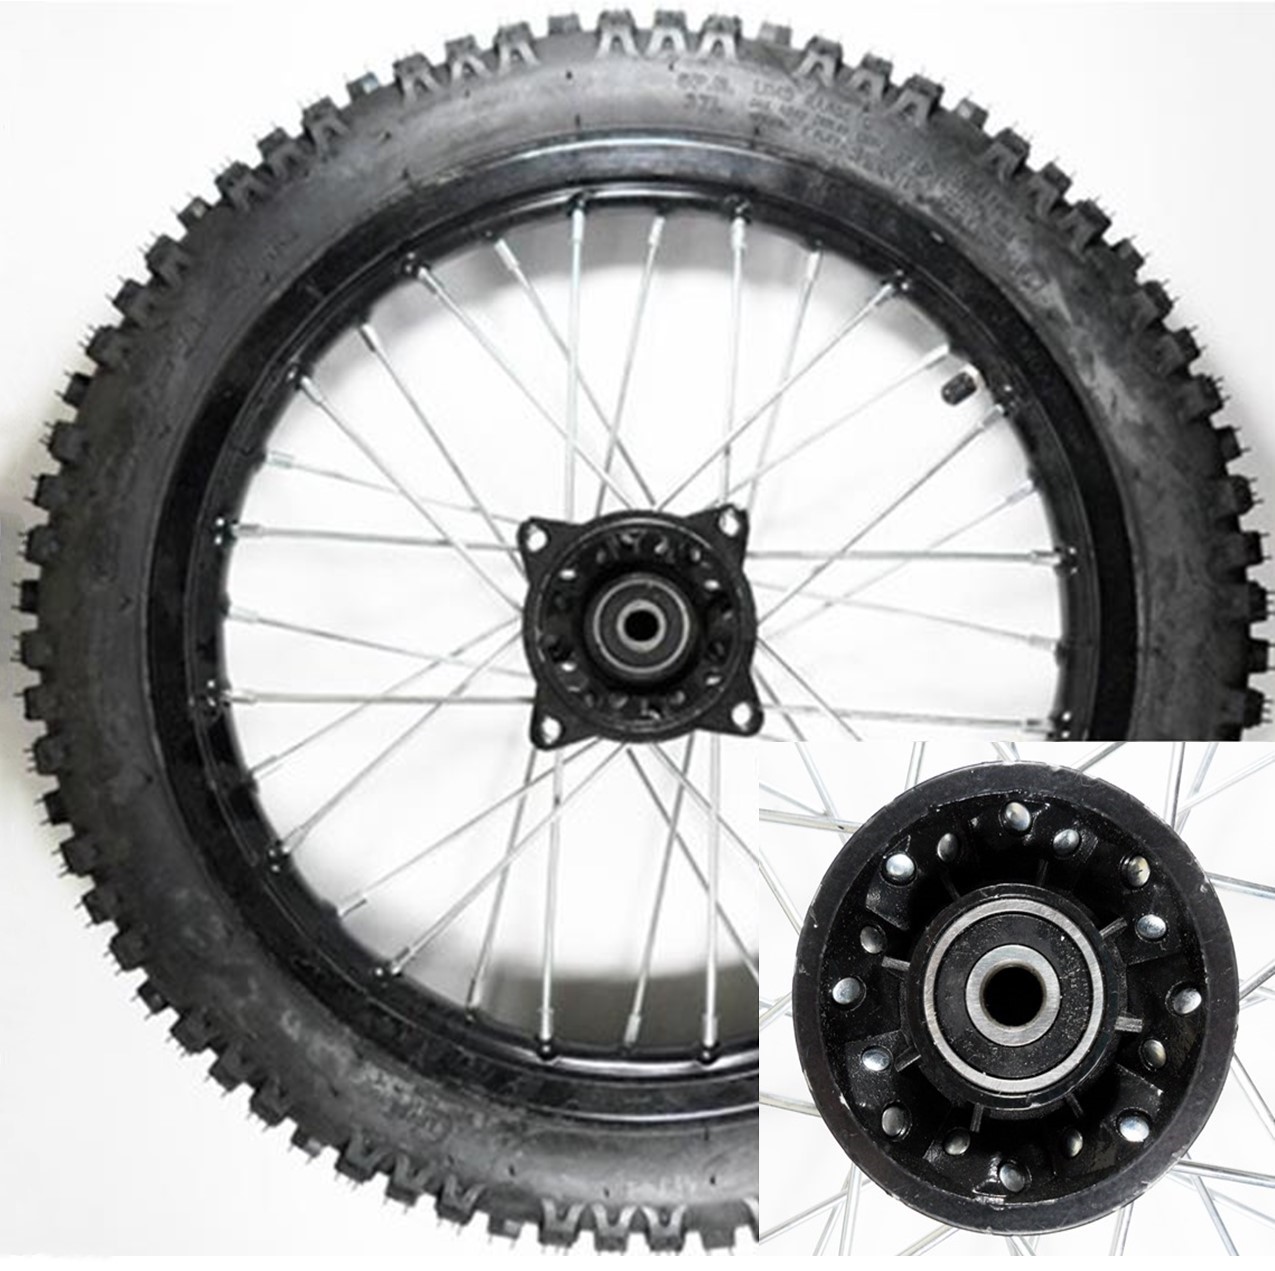 Front Wheel with Tire Rim=1.40X14 Tire=2.50(60/100)x14 Disc Brake Black Axle ID=12 Bolts Cross c/c=100mm - Click Image to Close